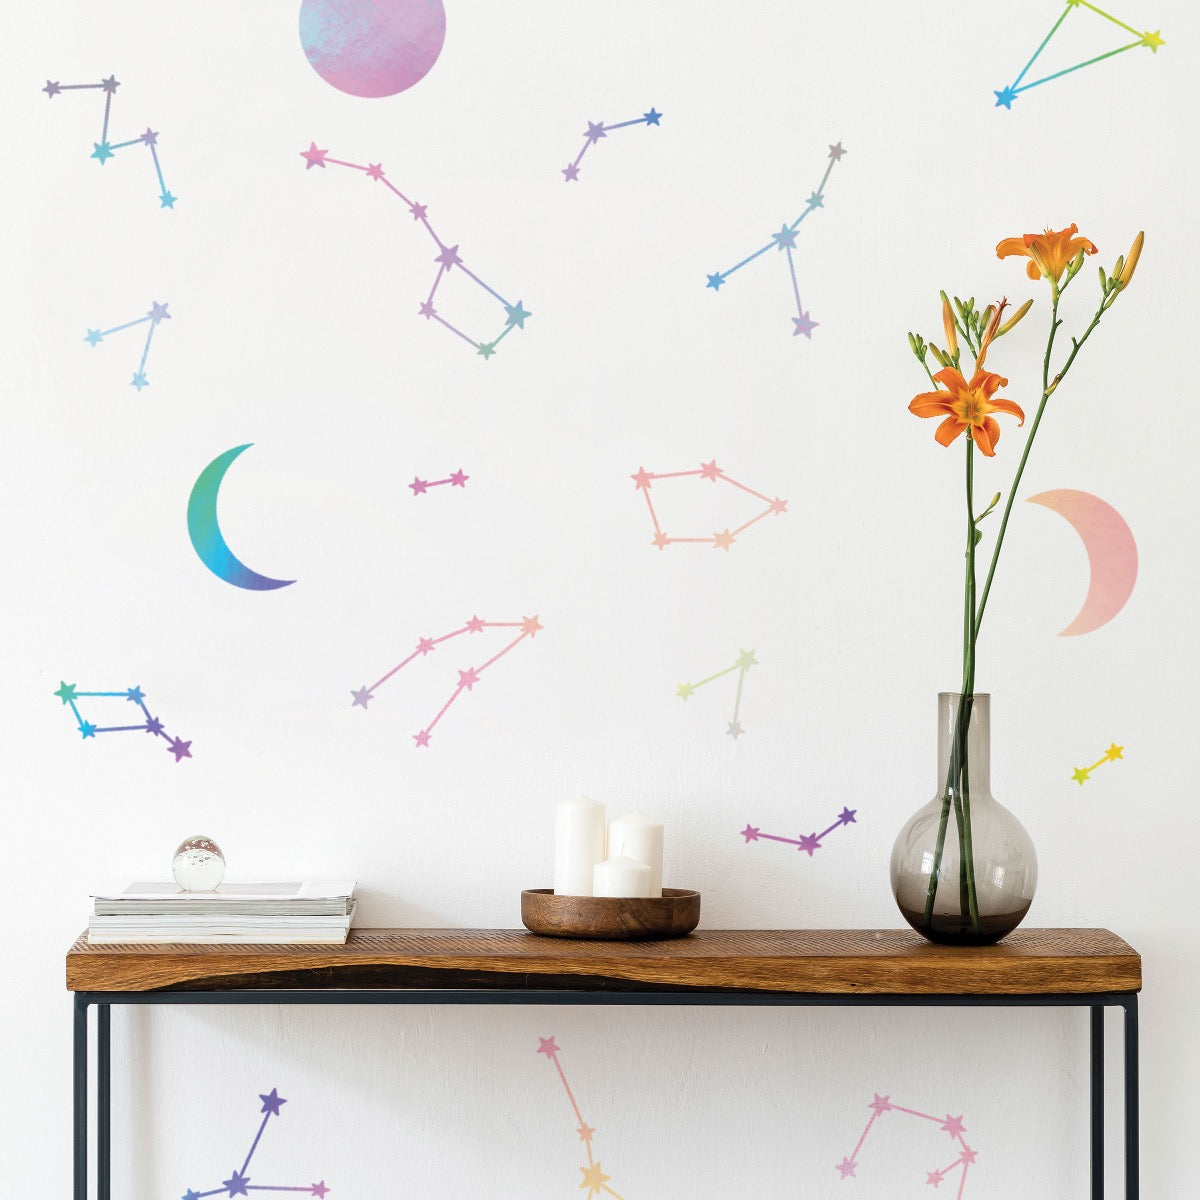 A wood side table with magazines, candles, and flowers in front of a wall designed using Tempaper's holographic Constellations & Moons wall decals.